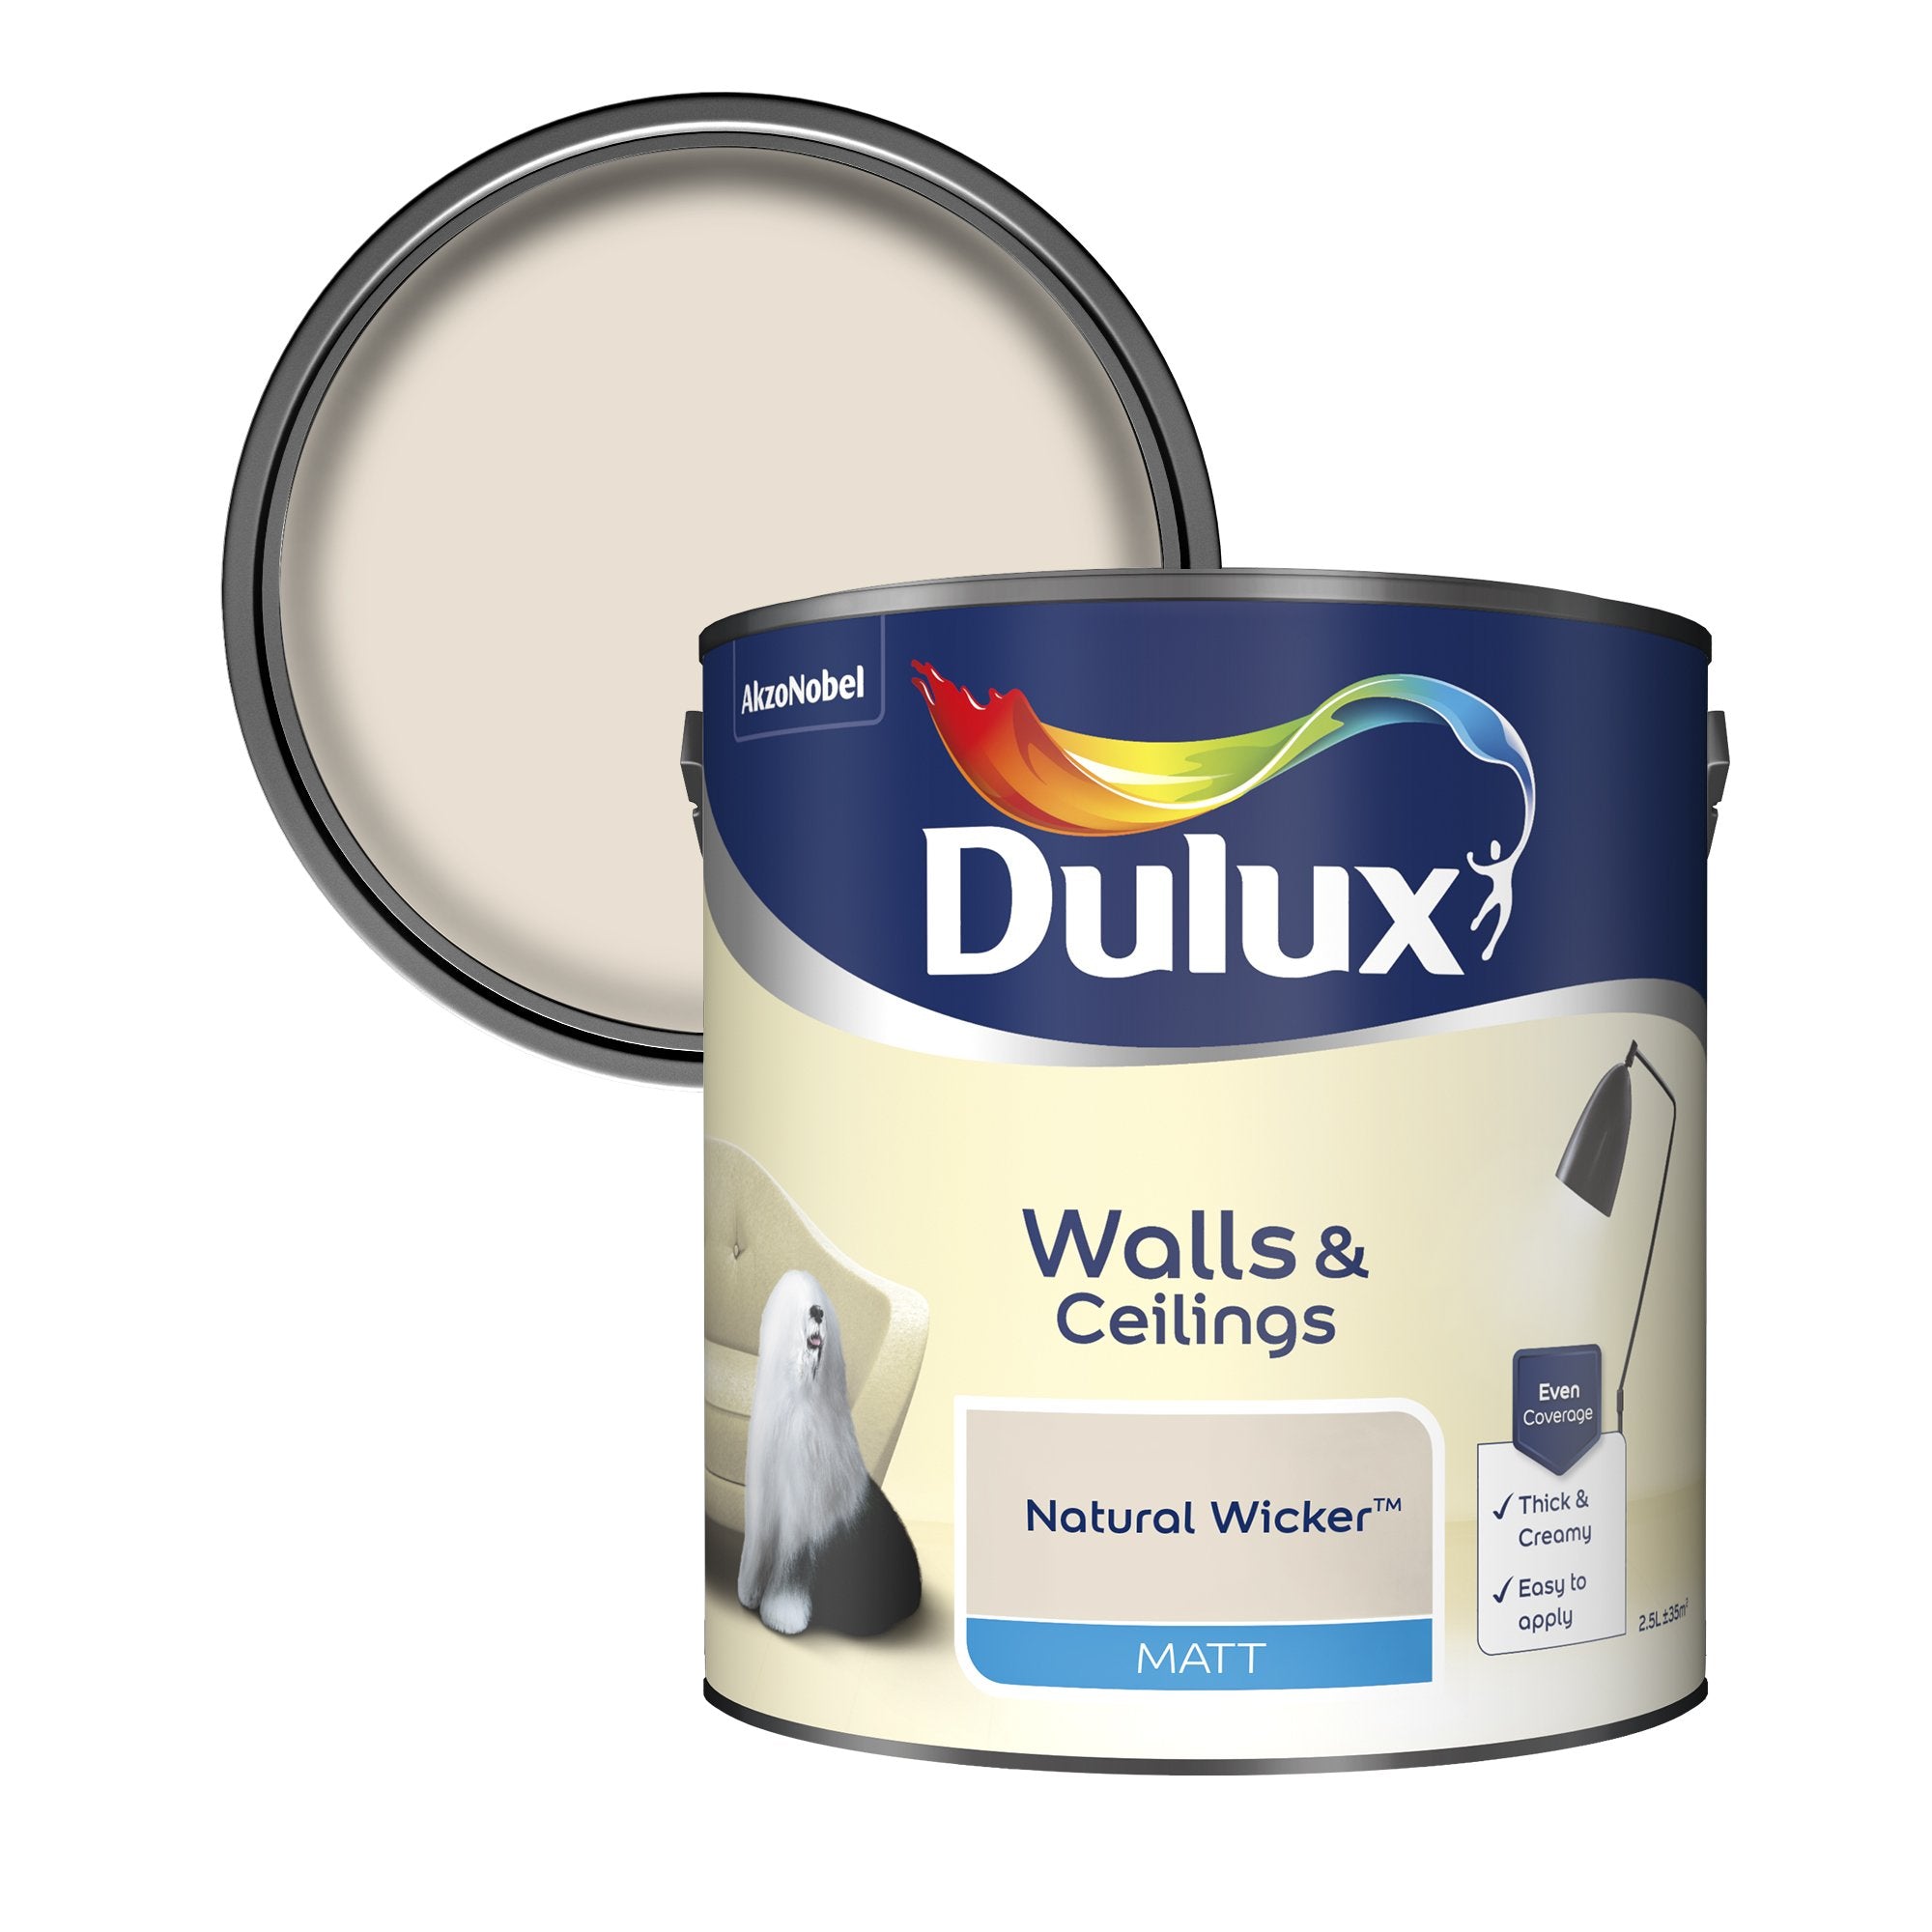 Dulux-Matt-Emulsion-Paint-For-Walls-And-Ceilings-Natural-Wicker-2.5L